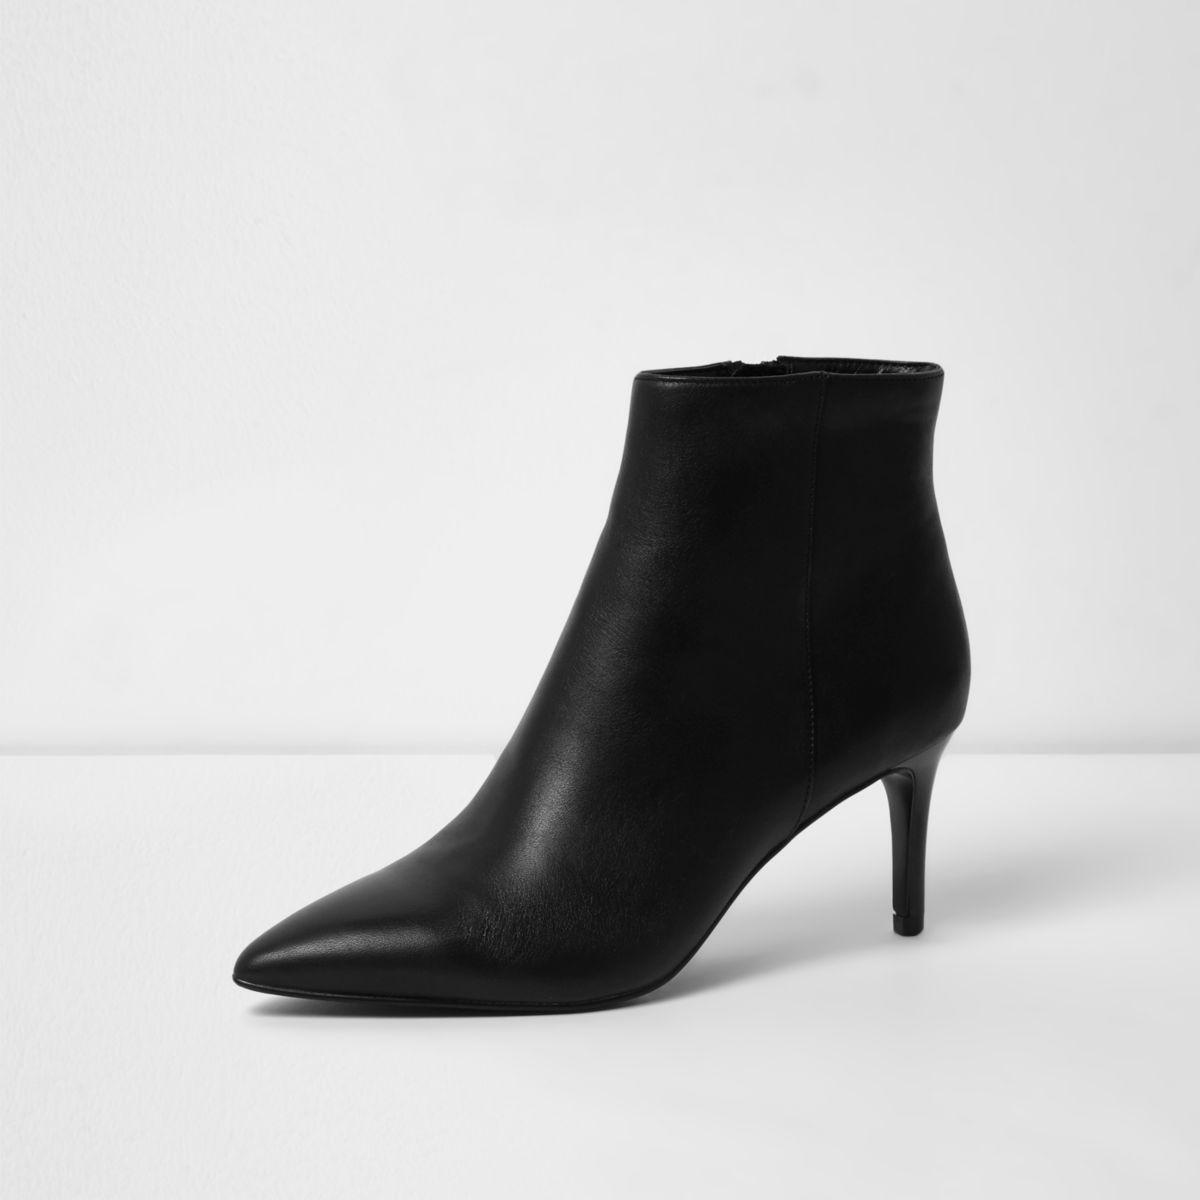 Lyst - River Island Black Leather Pointed Kitten Heel Ankle Boots in Black